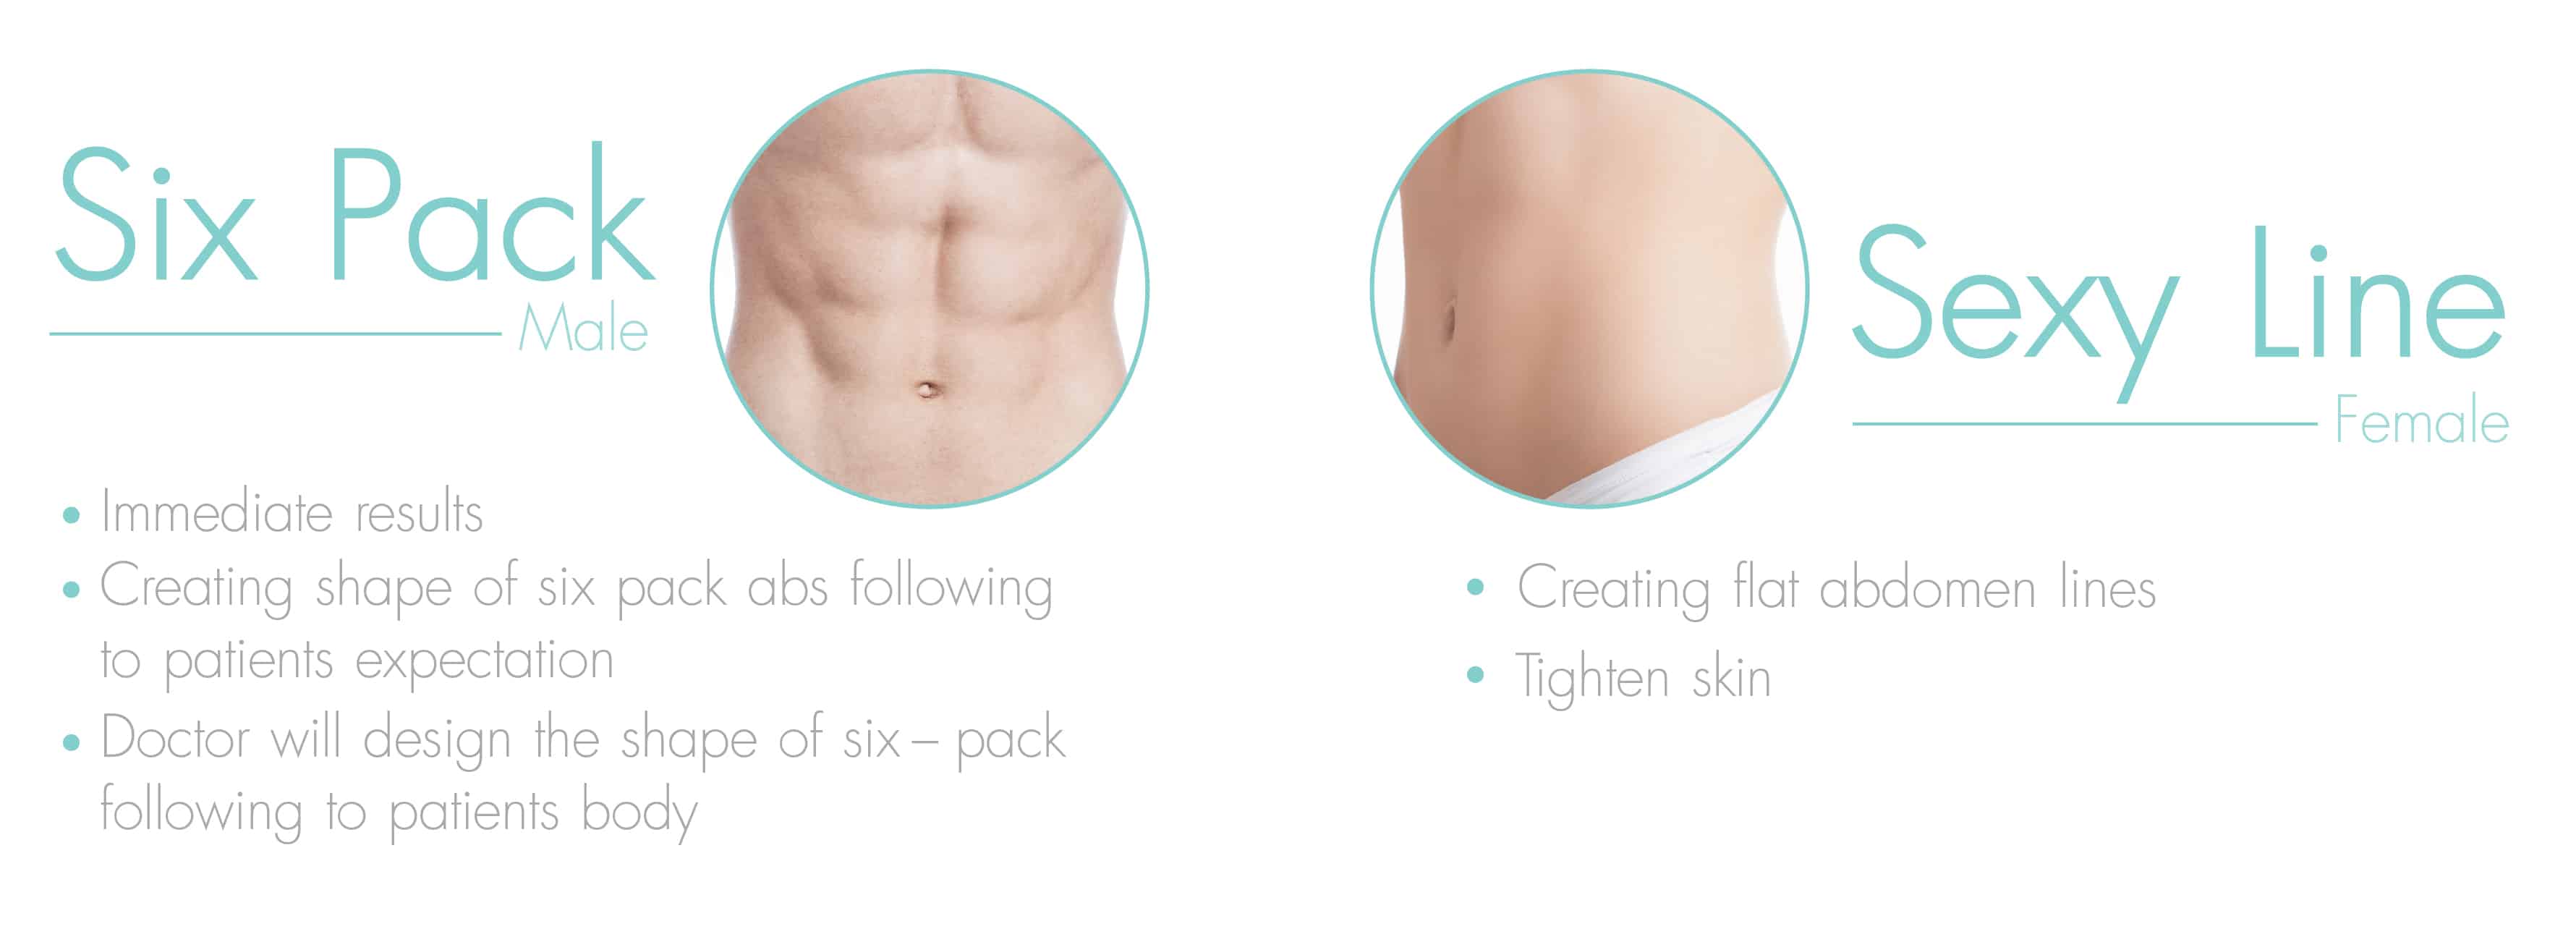 sixpack and sexy line